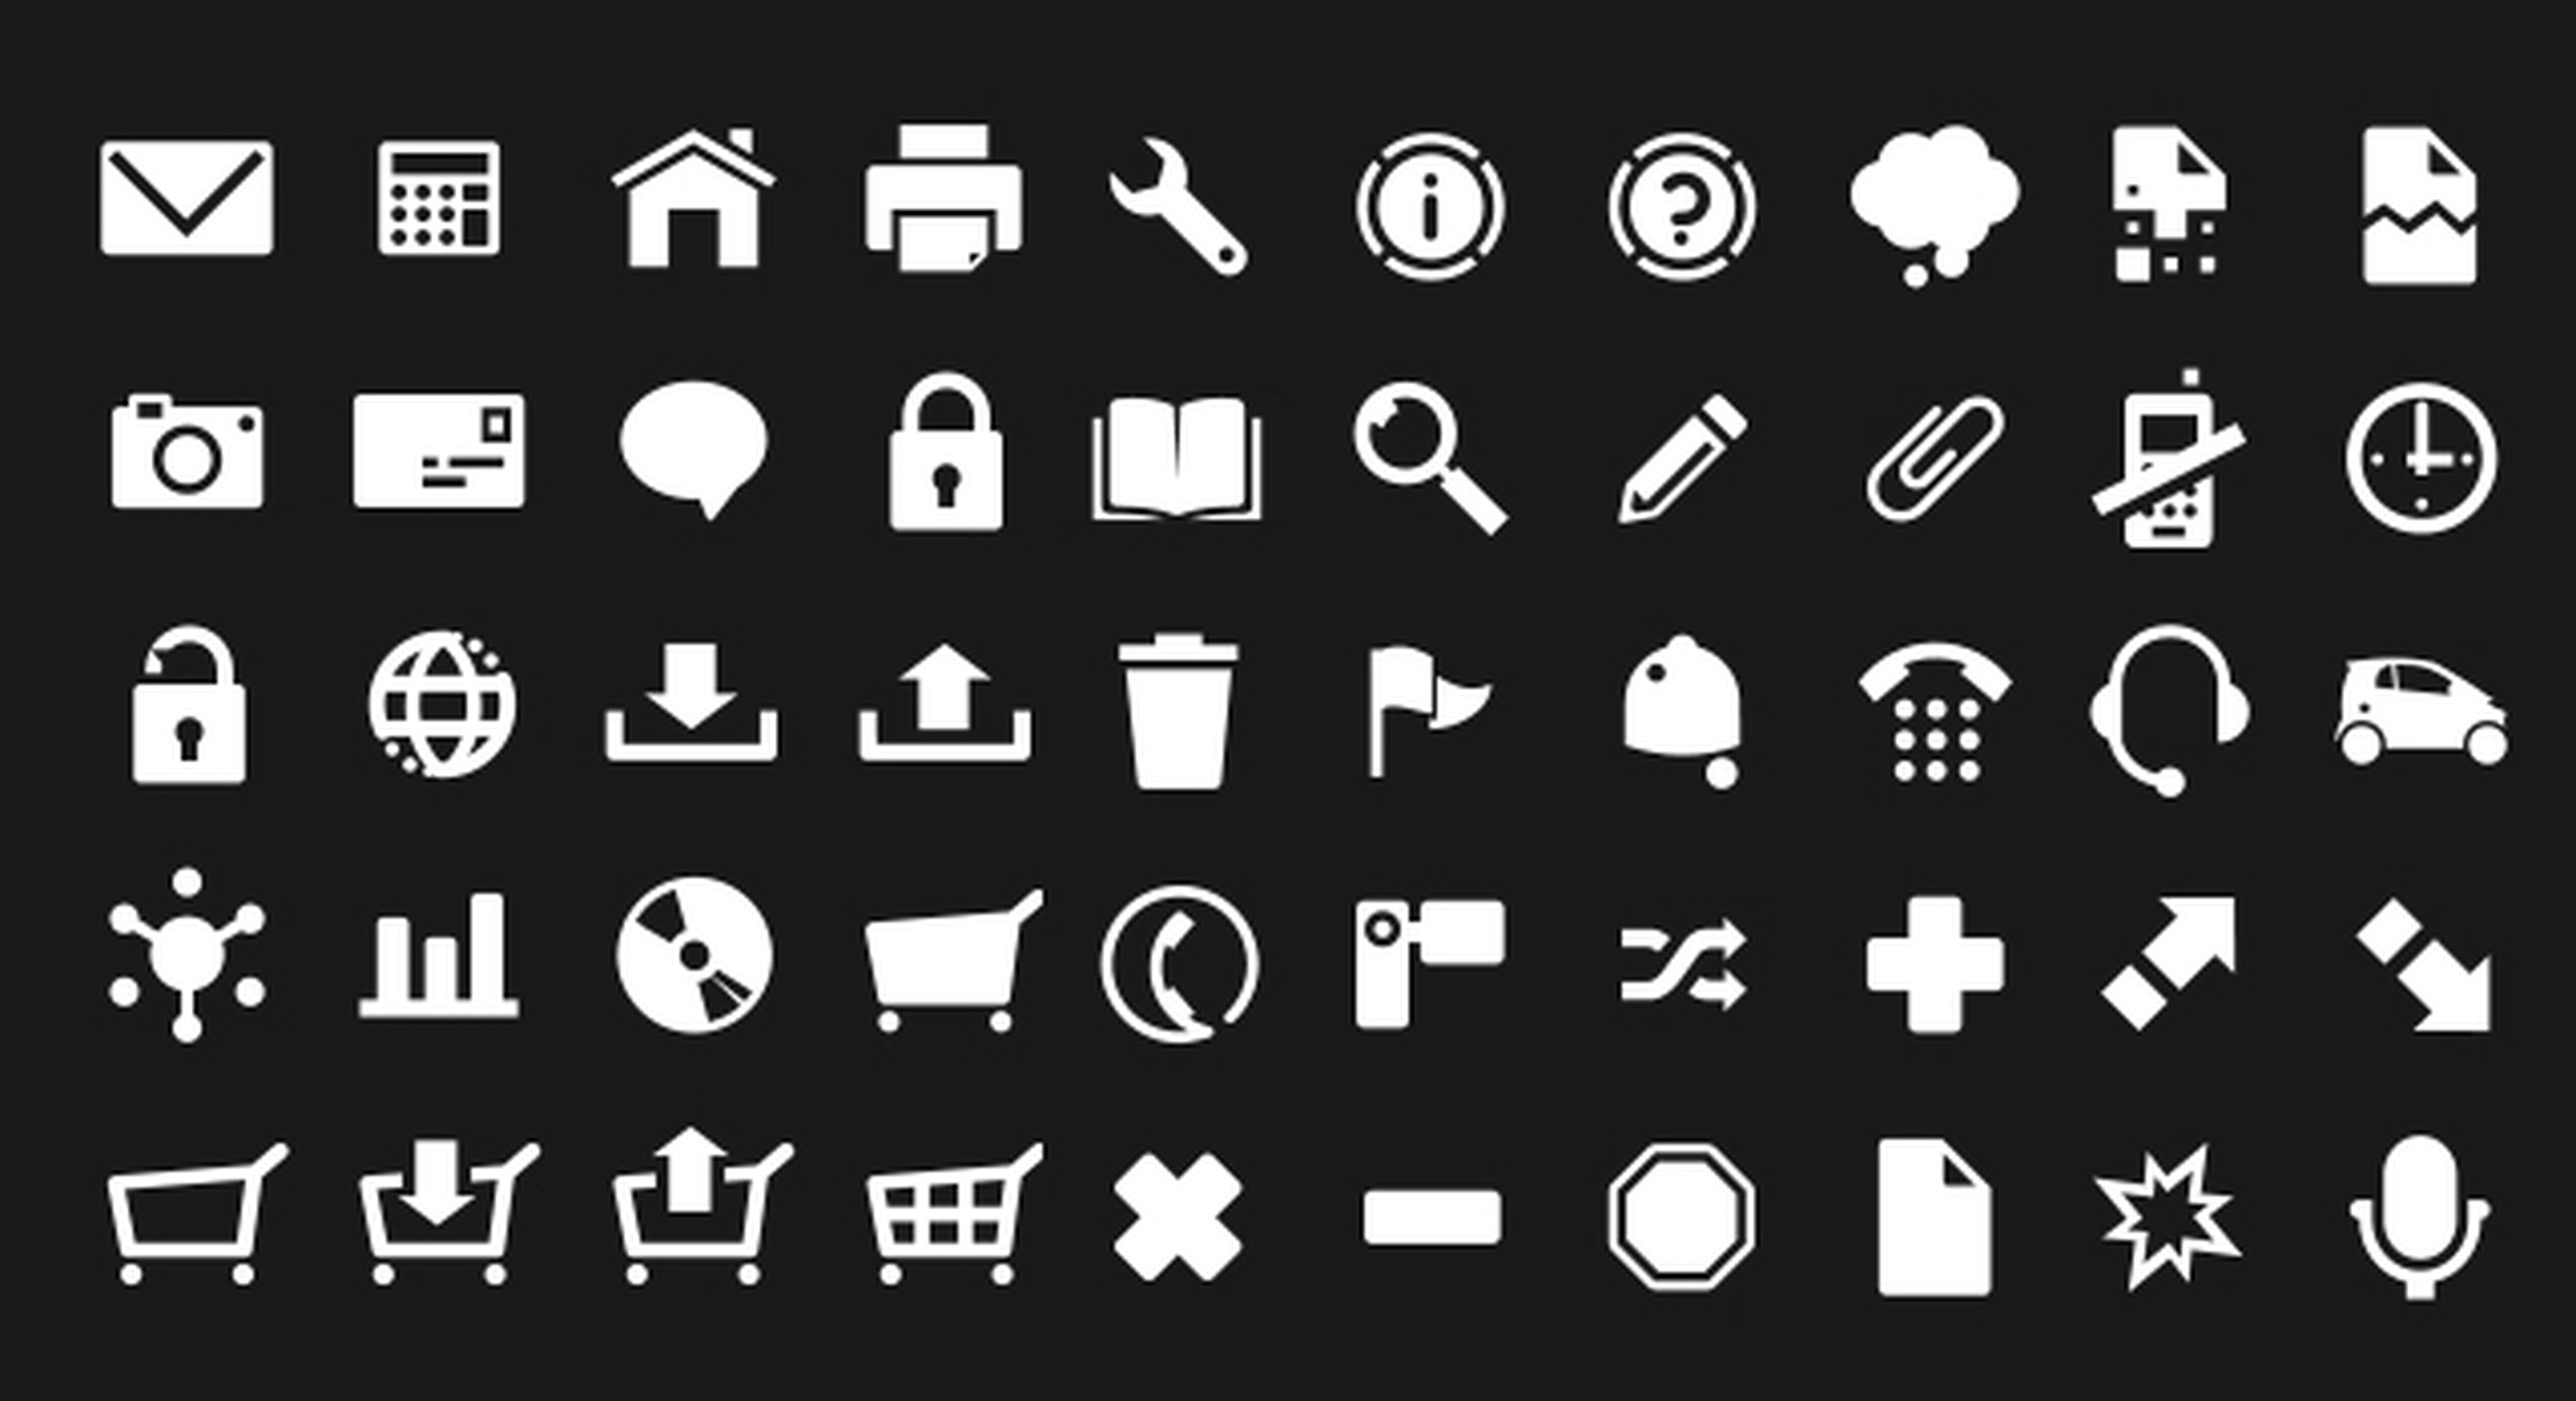 Download Rocketdock Icon Pack at Vectorified.com | Collection of ...